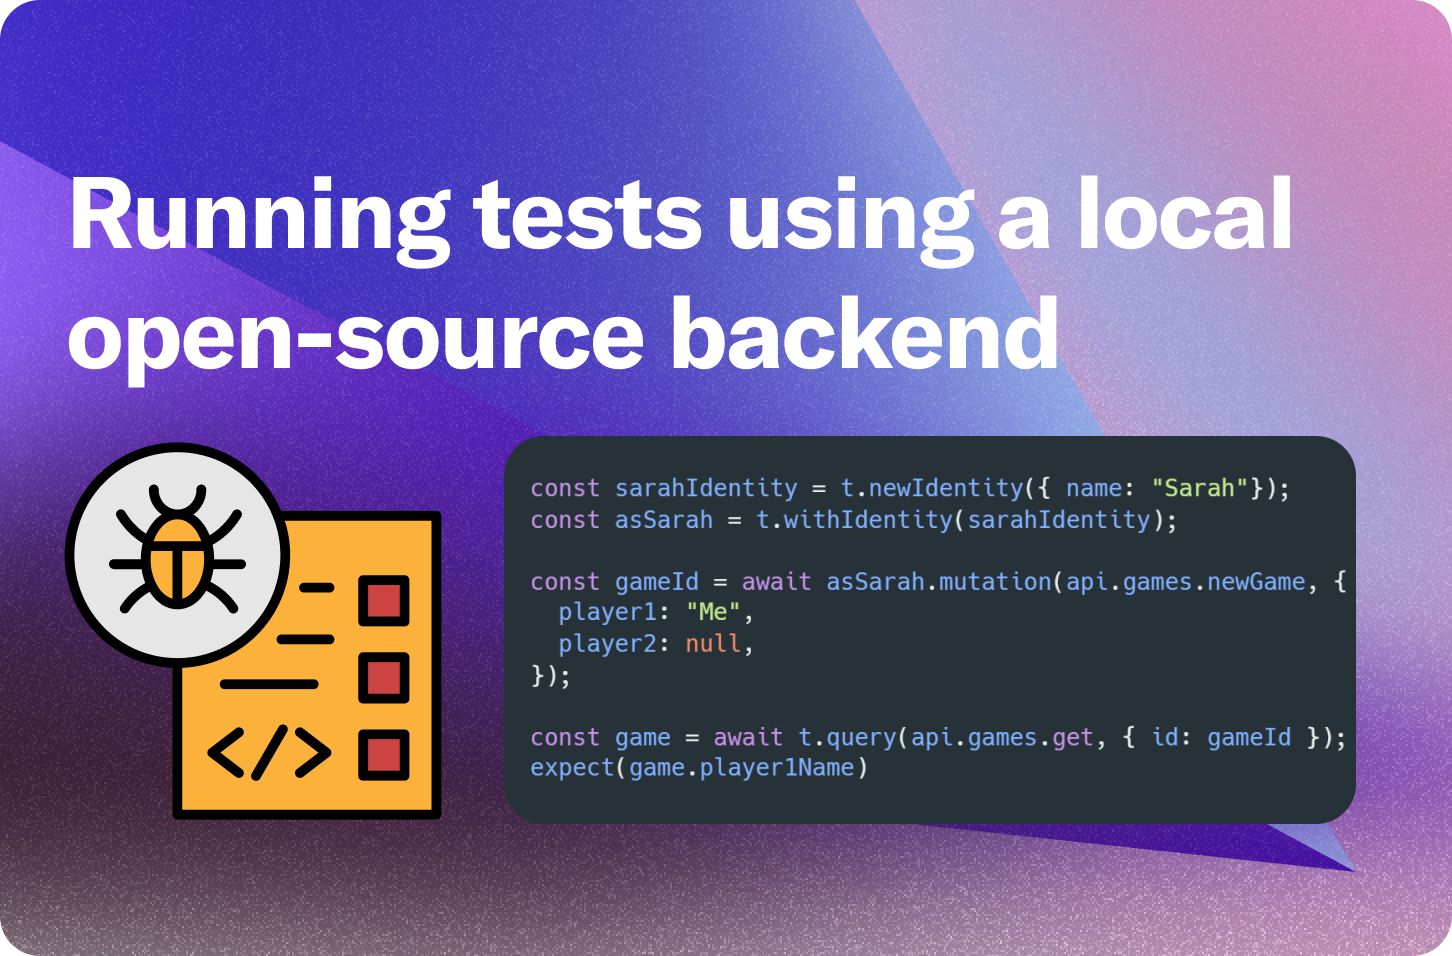 Running tests using a local open-source backend